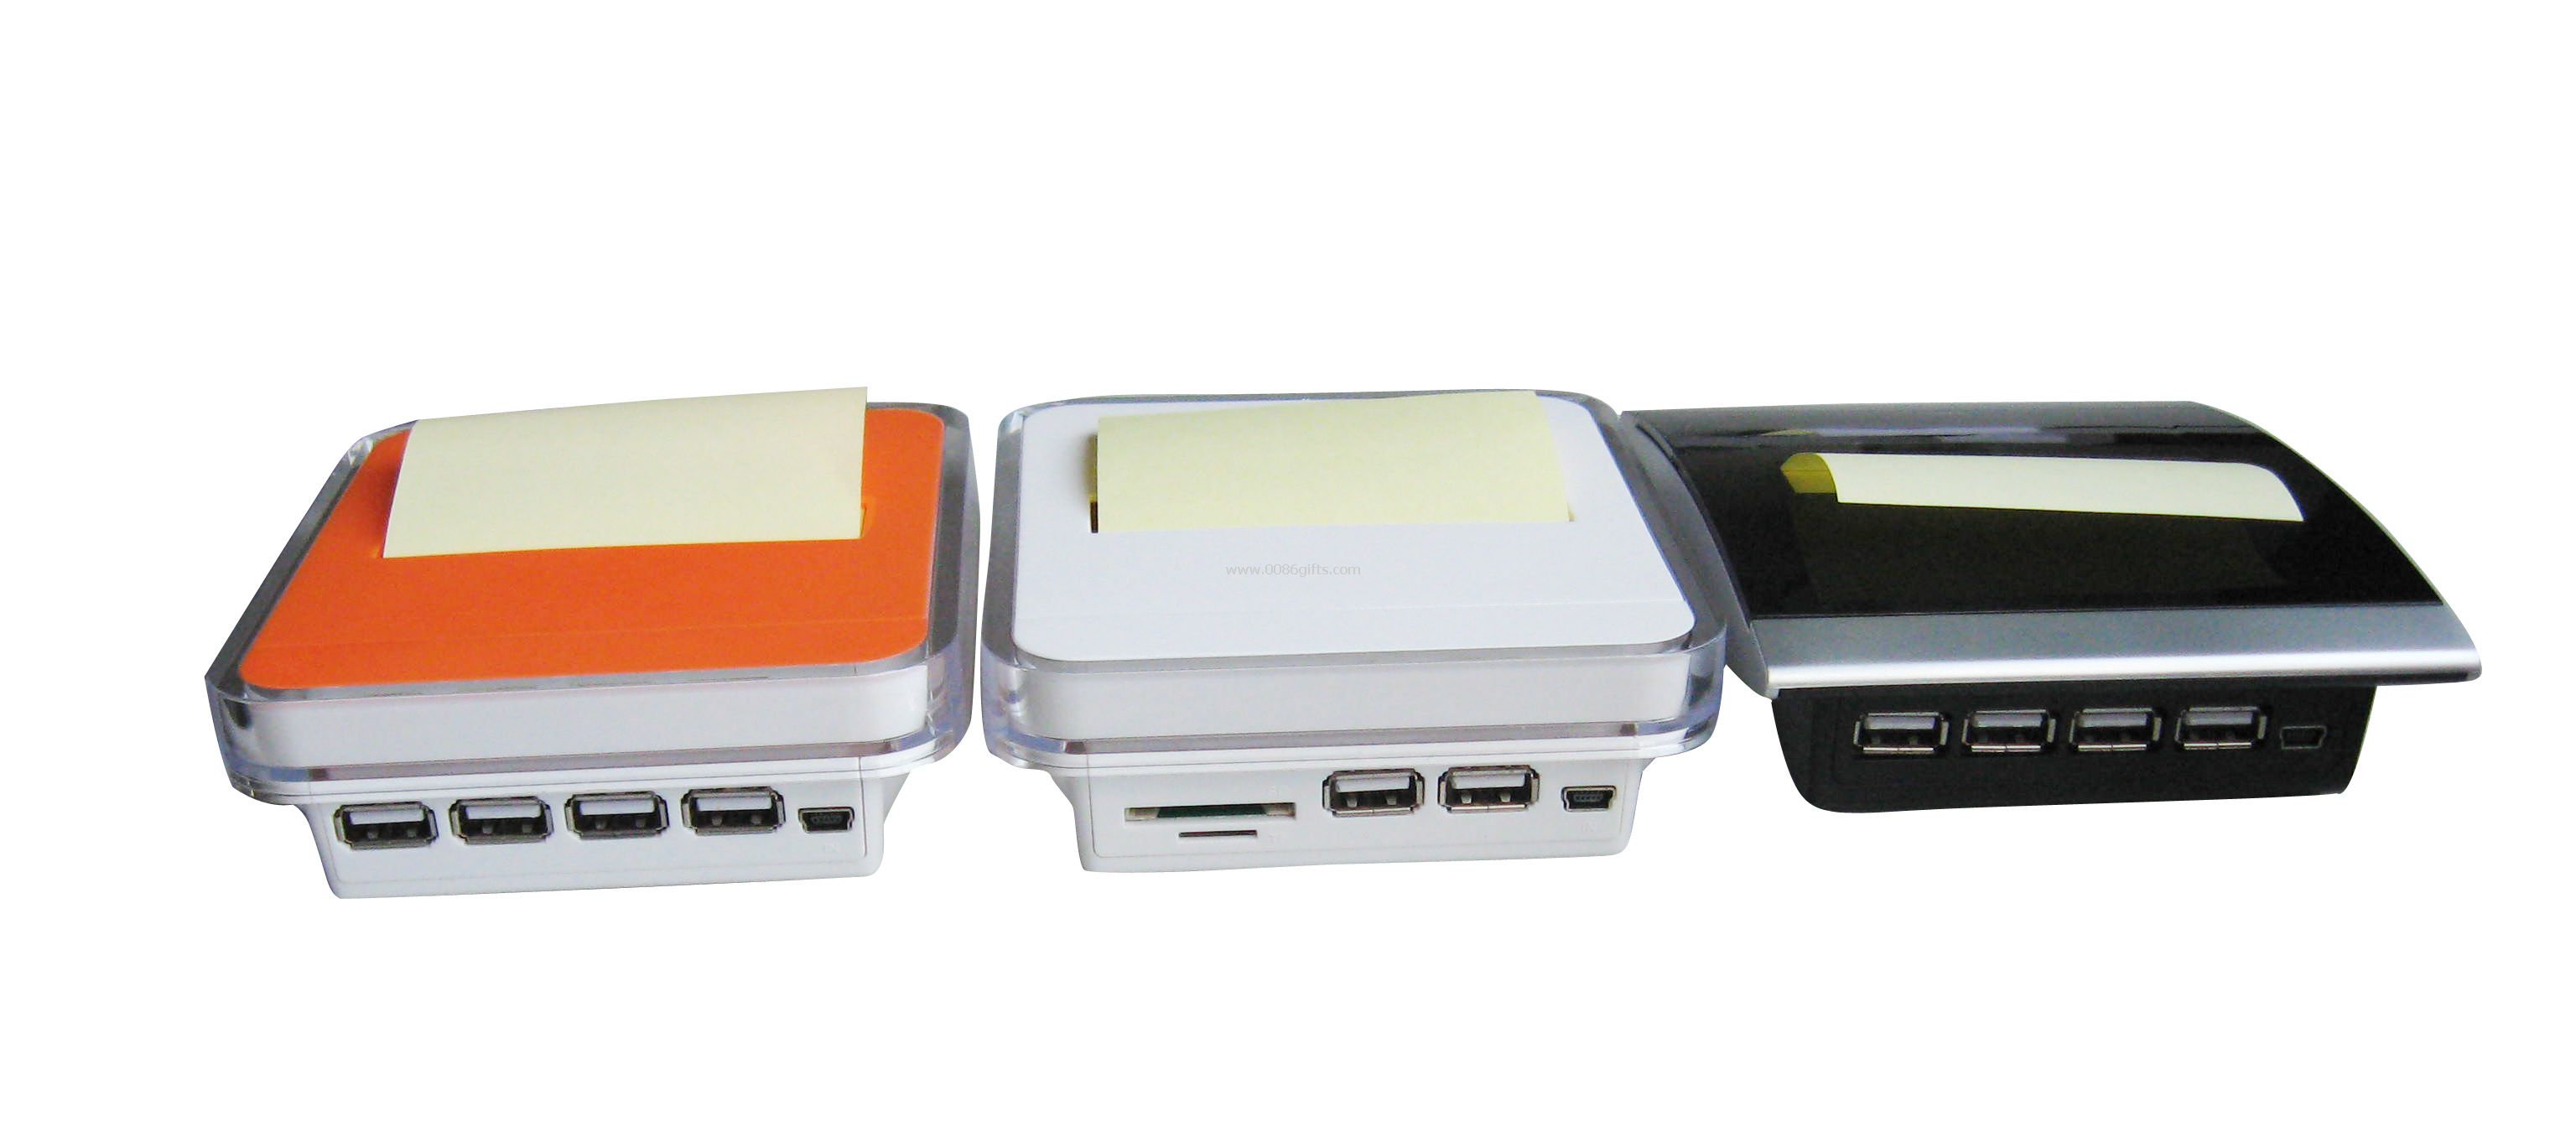 USB Hub with Pop-up note dispenser